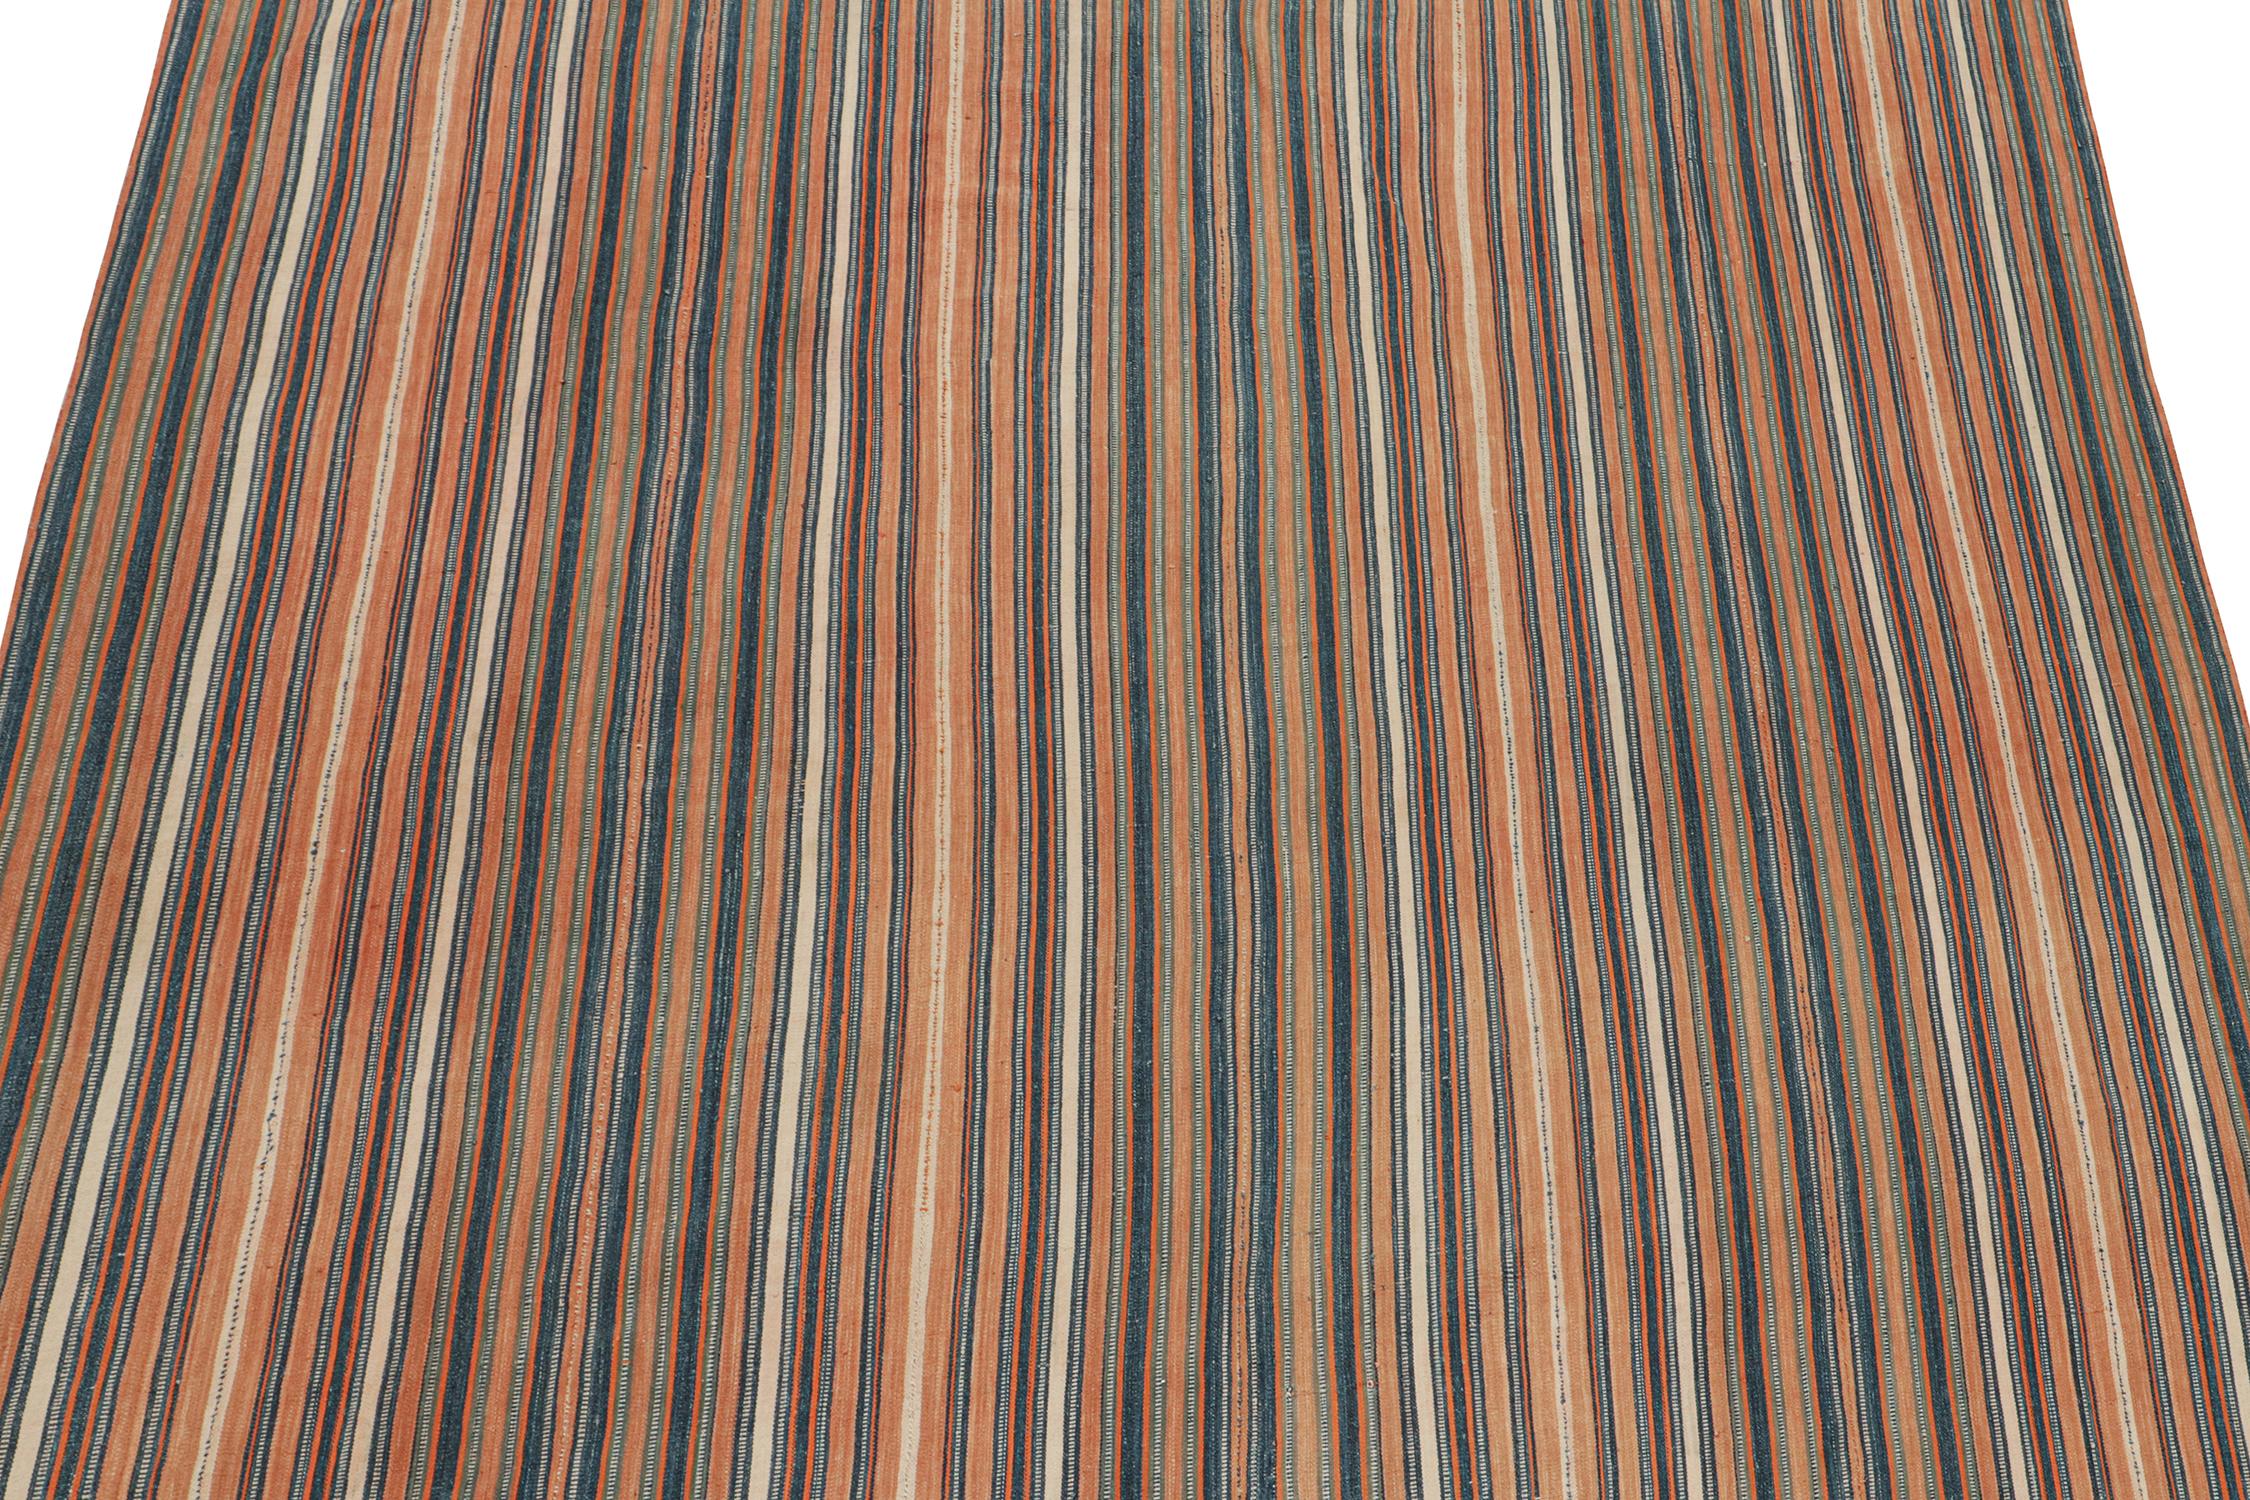 This vintage 6x6 Persian Kilim is a Jajim-style flat weave believed to originate from the Qashqai Tribe. 

Handwoven in wool circa 1950-1960, its design prefers navy blue and peach stripes with vibrant orange and off-white notes. Connoisseurs will